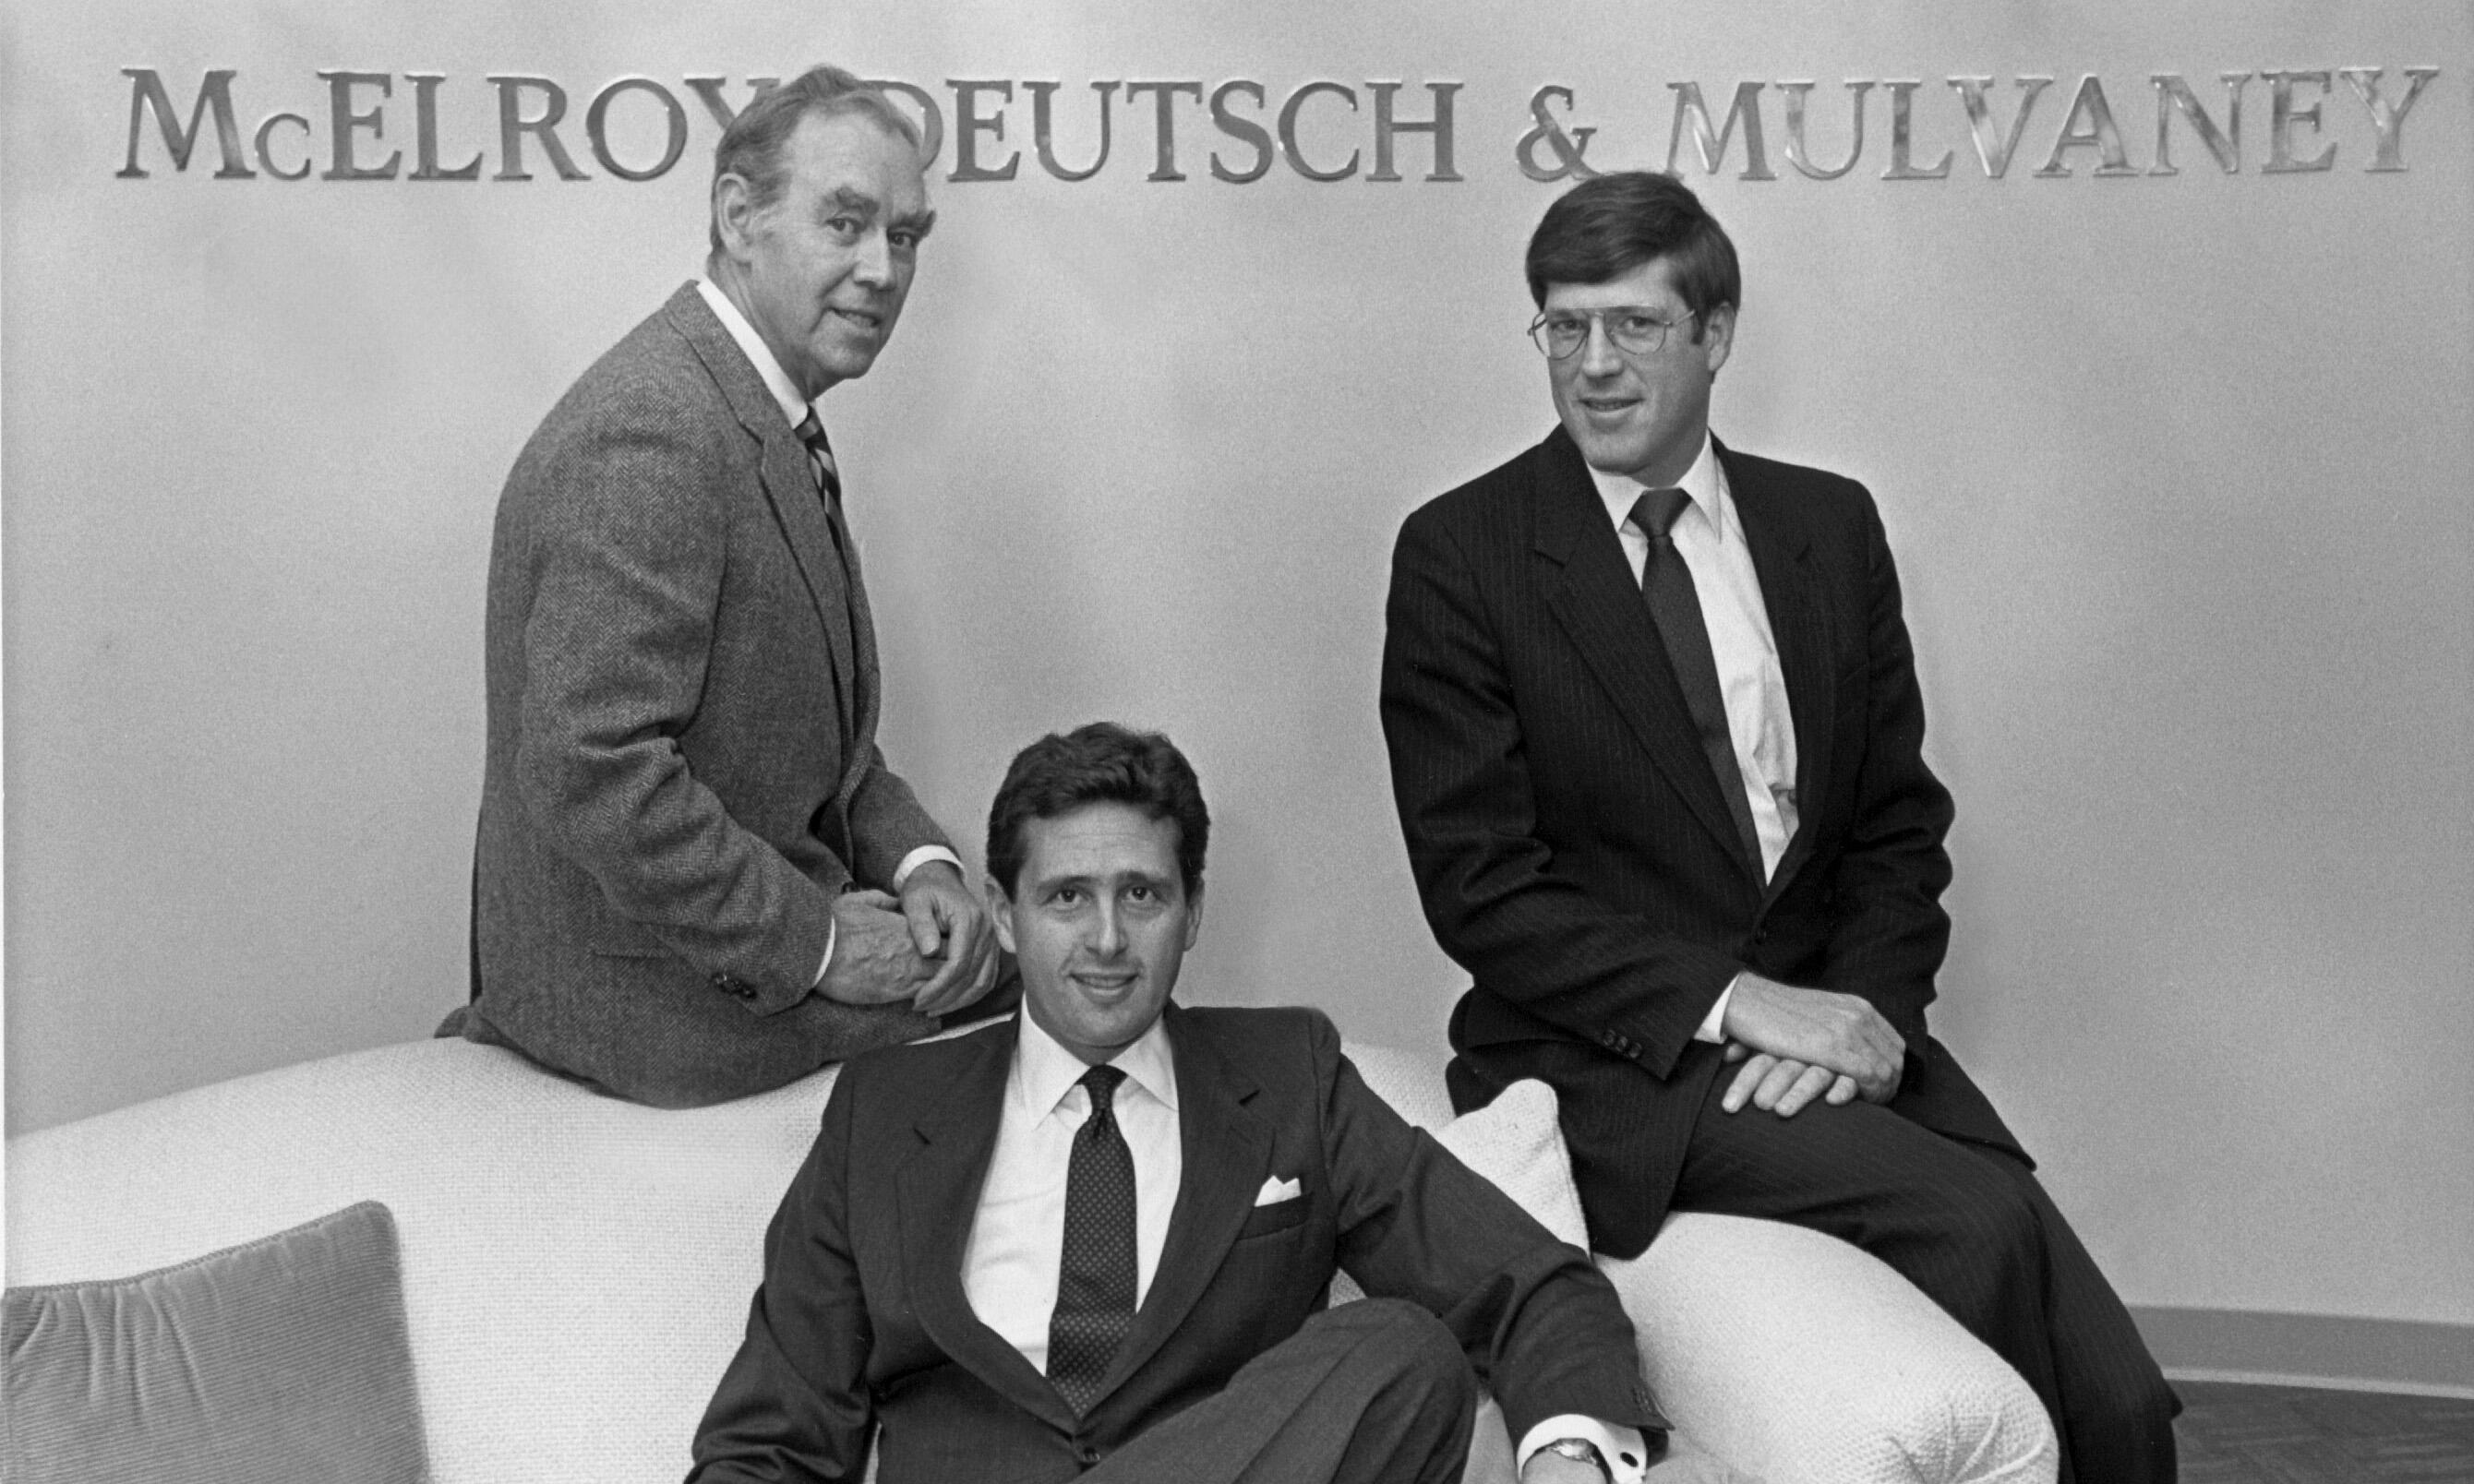 Firm founders, in an early photo circa 1984, included (left to right) William T. McElroy, Edward B. Deutsch, and James M. Mulvaney.